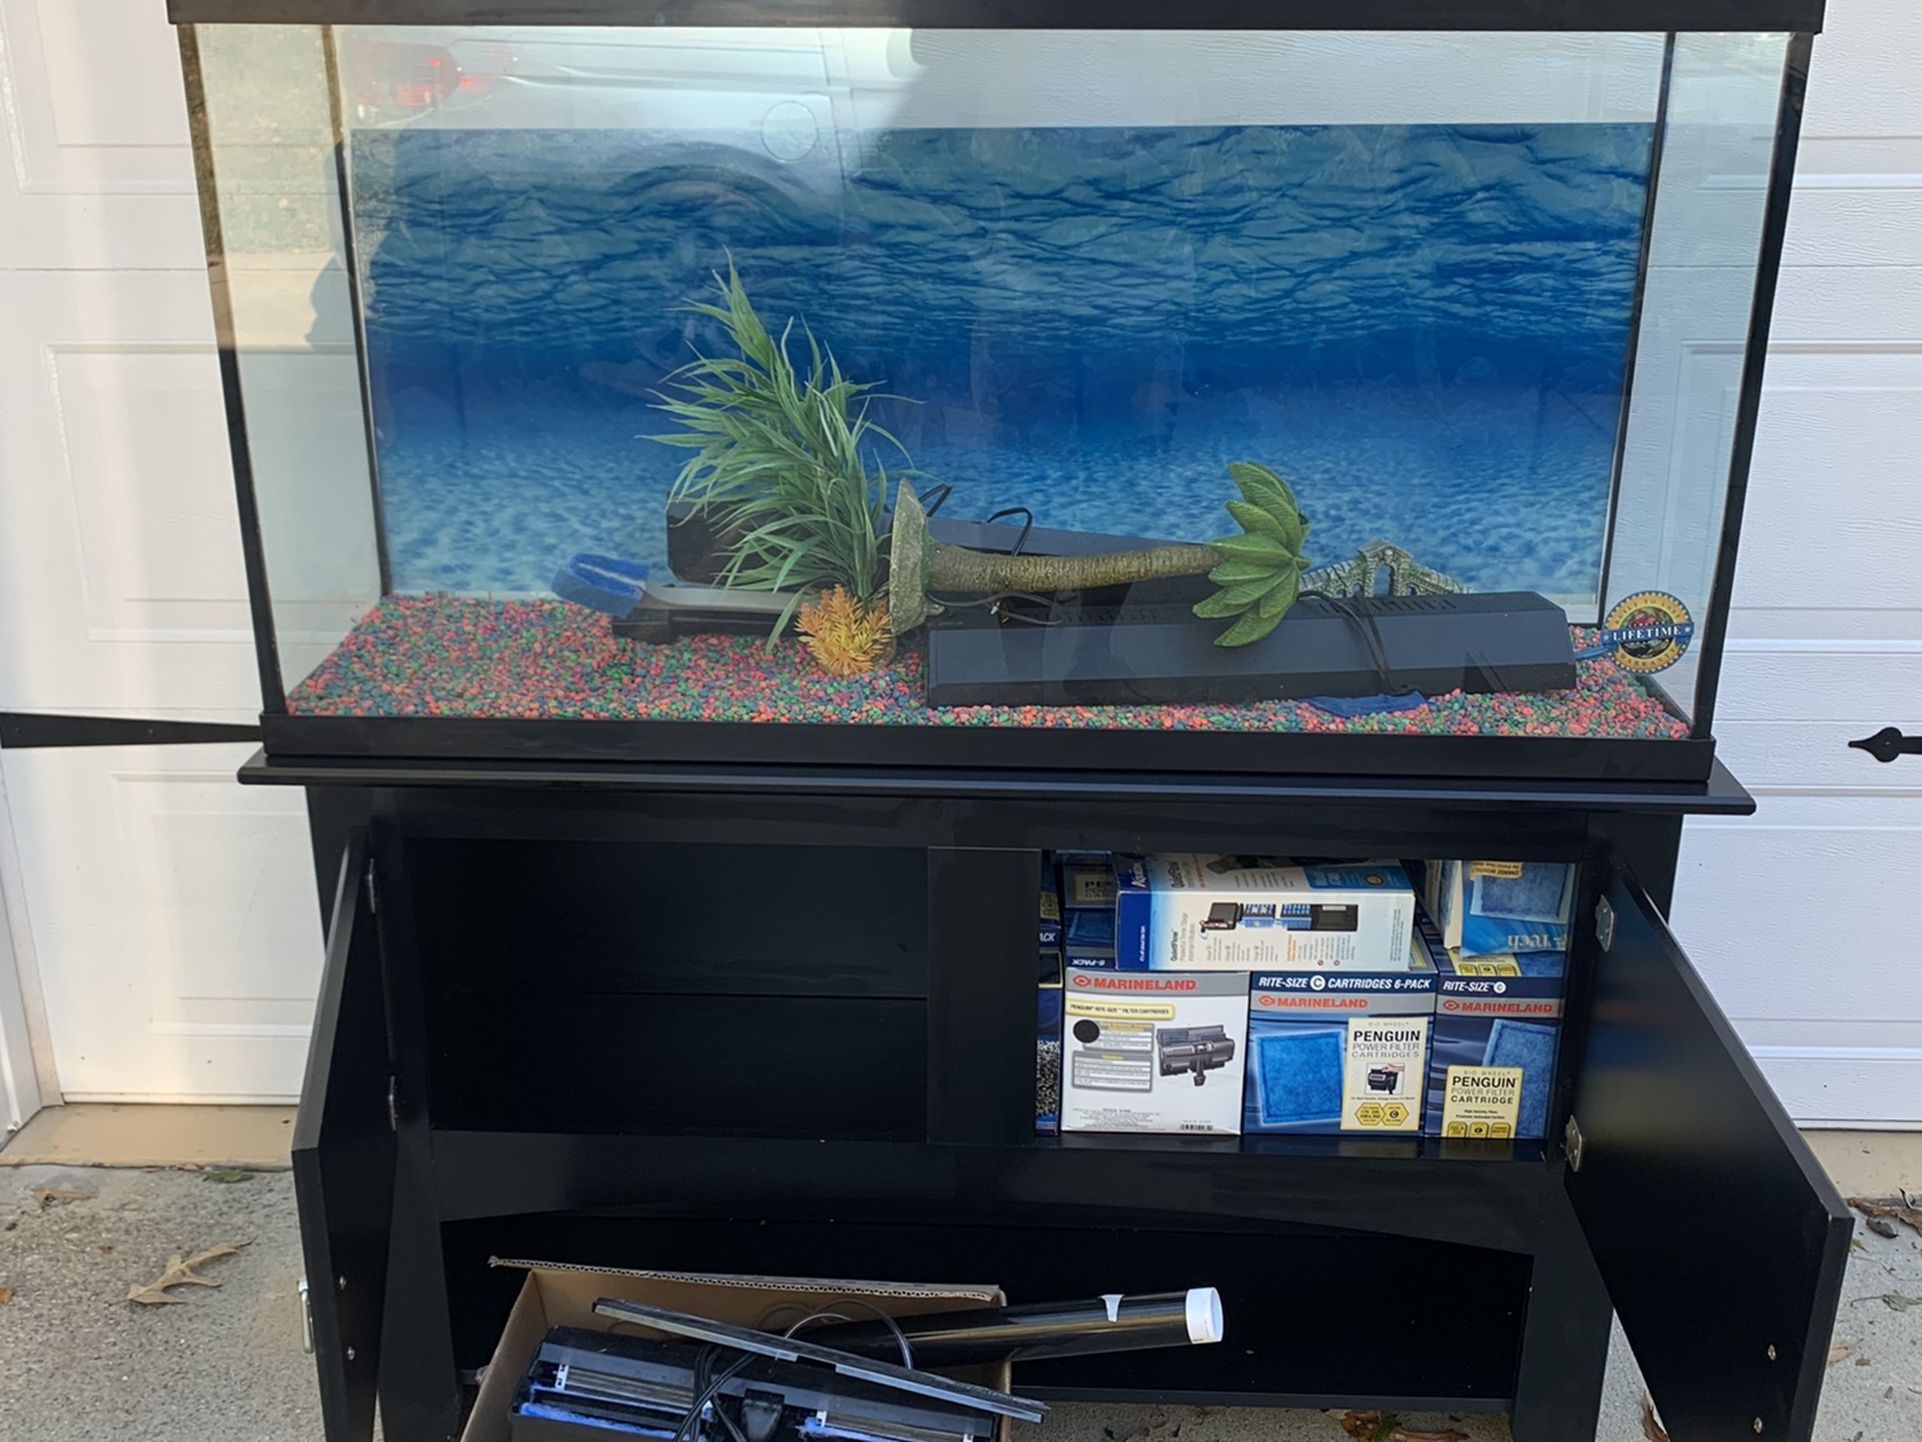 Aquarium fish tank 48L x 25 H x 12.5HD inches completed setup ready for new home